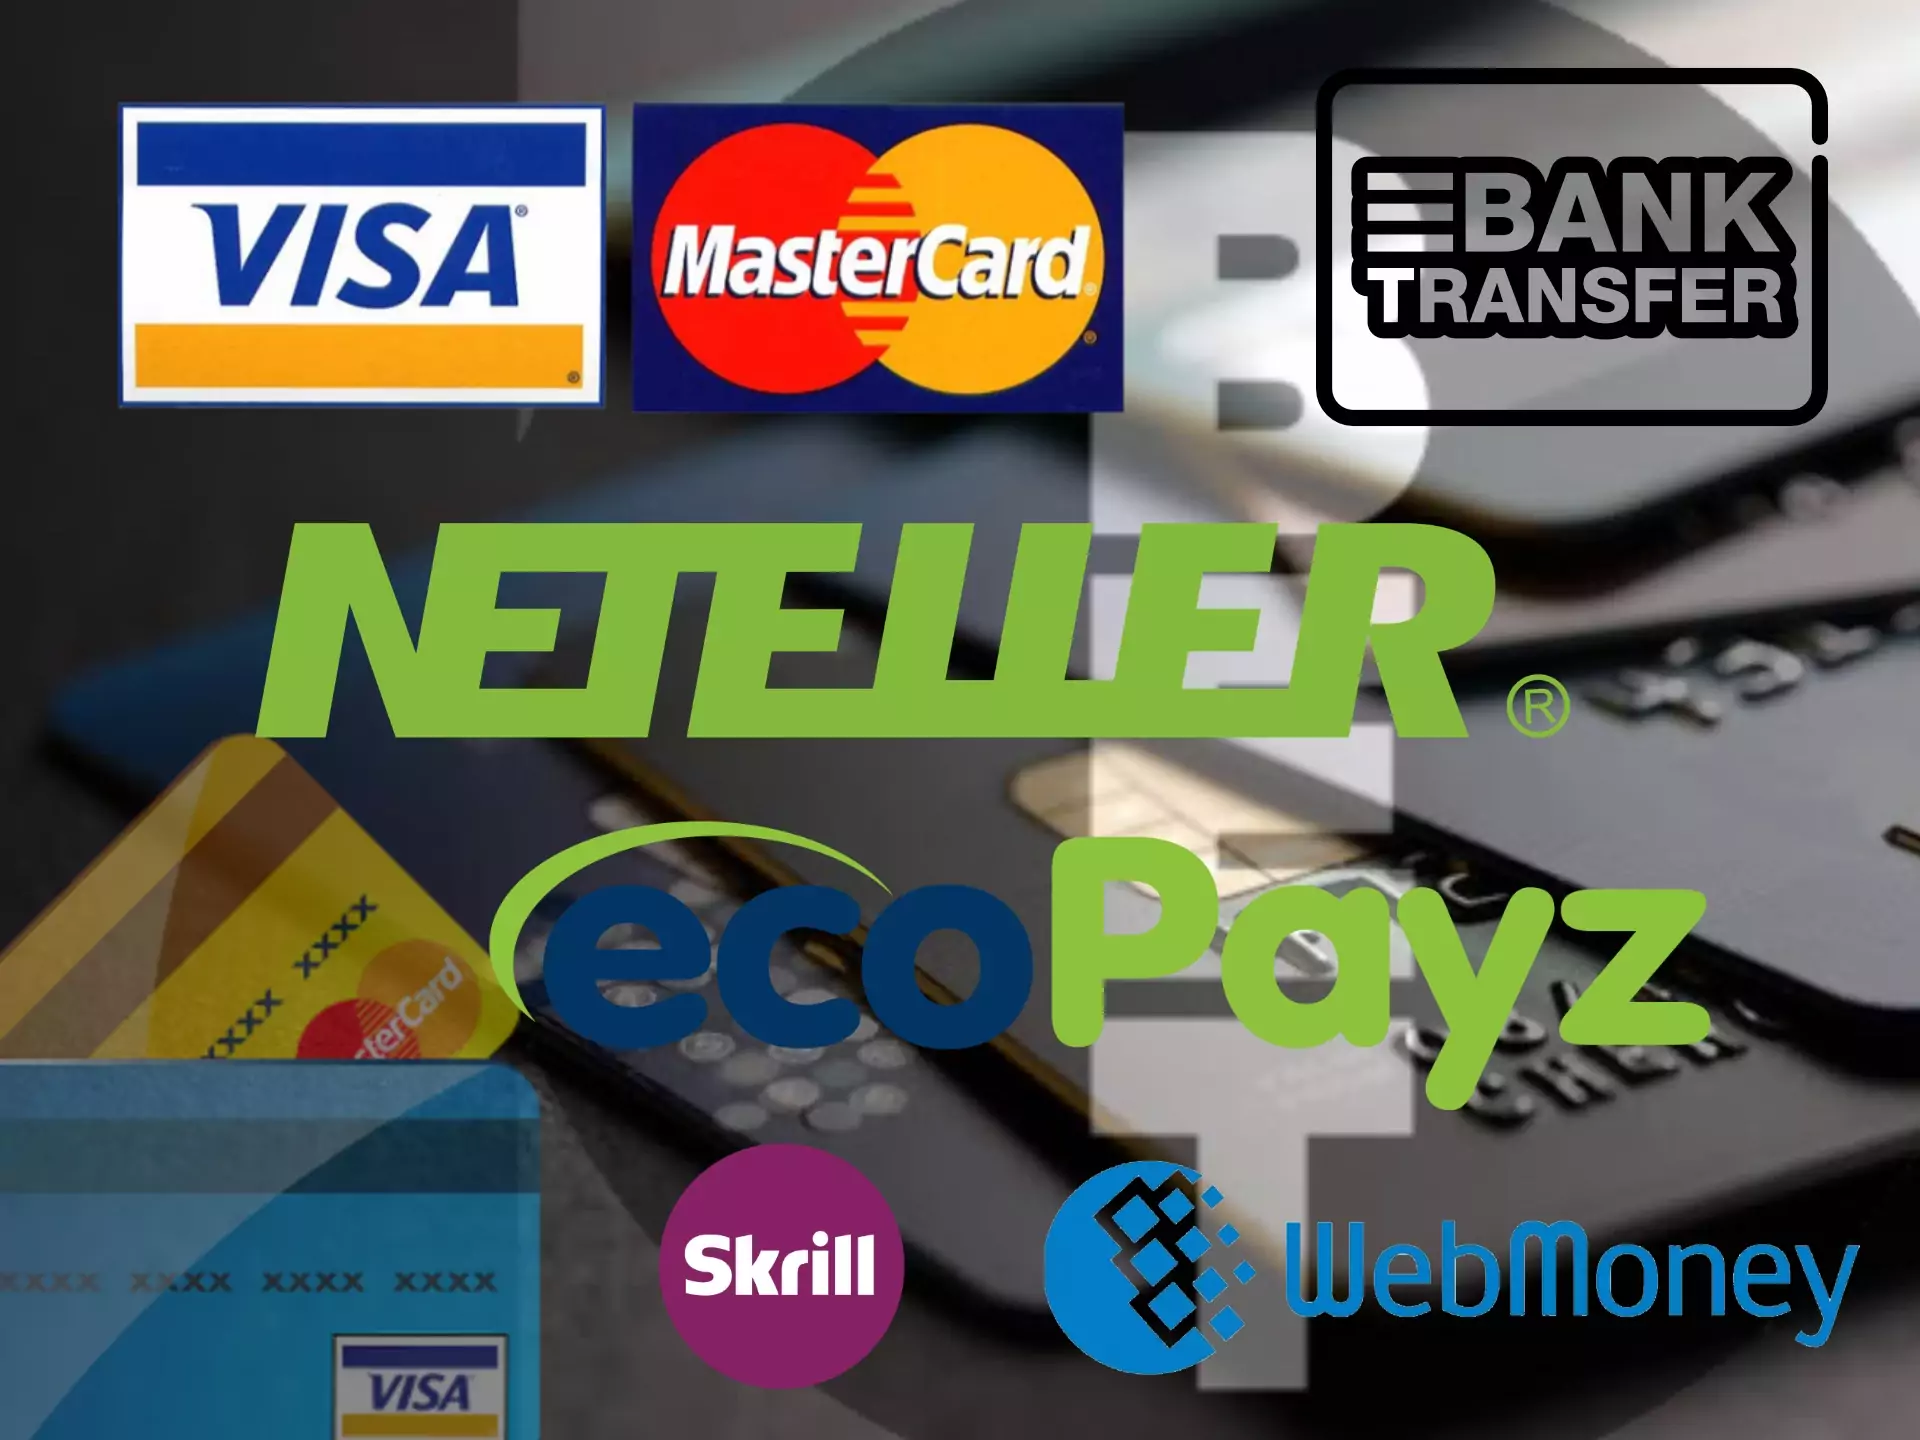 There are a lot of popular payment methods at 10bet.